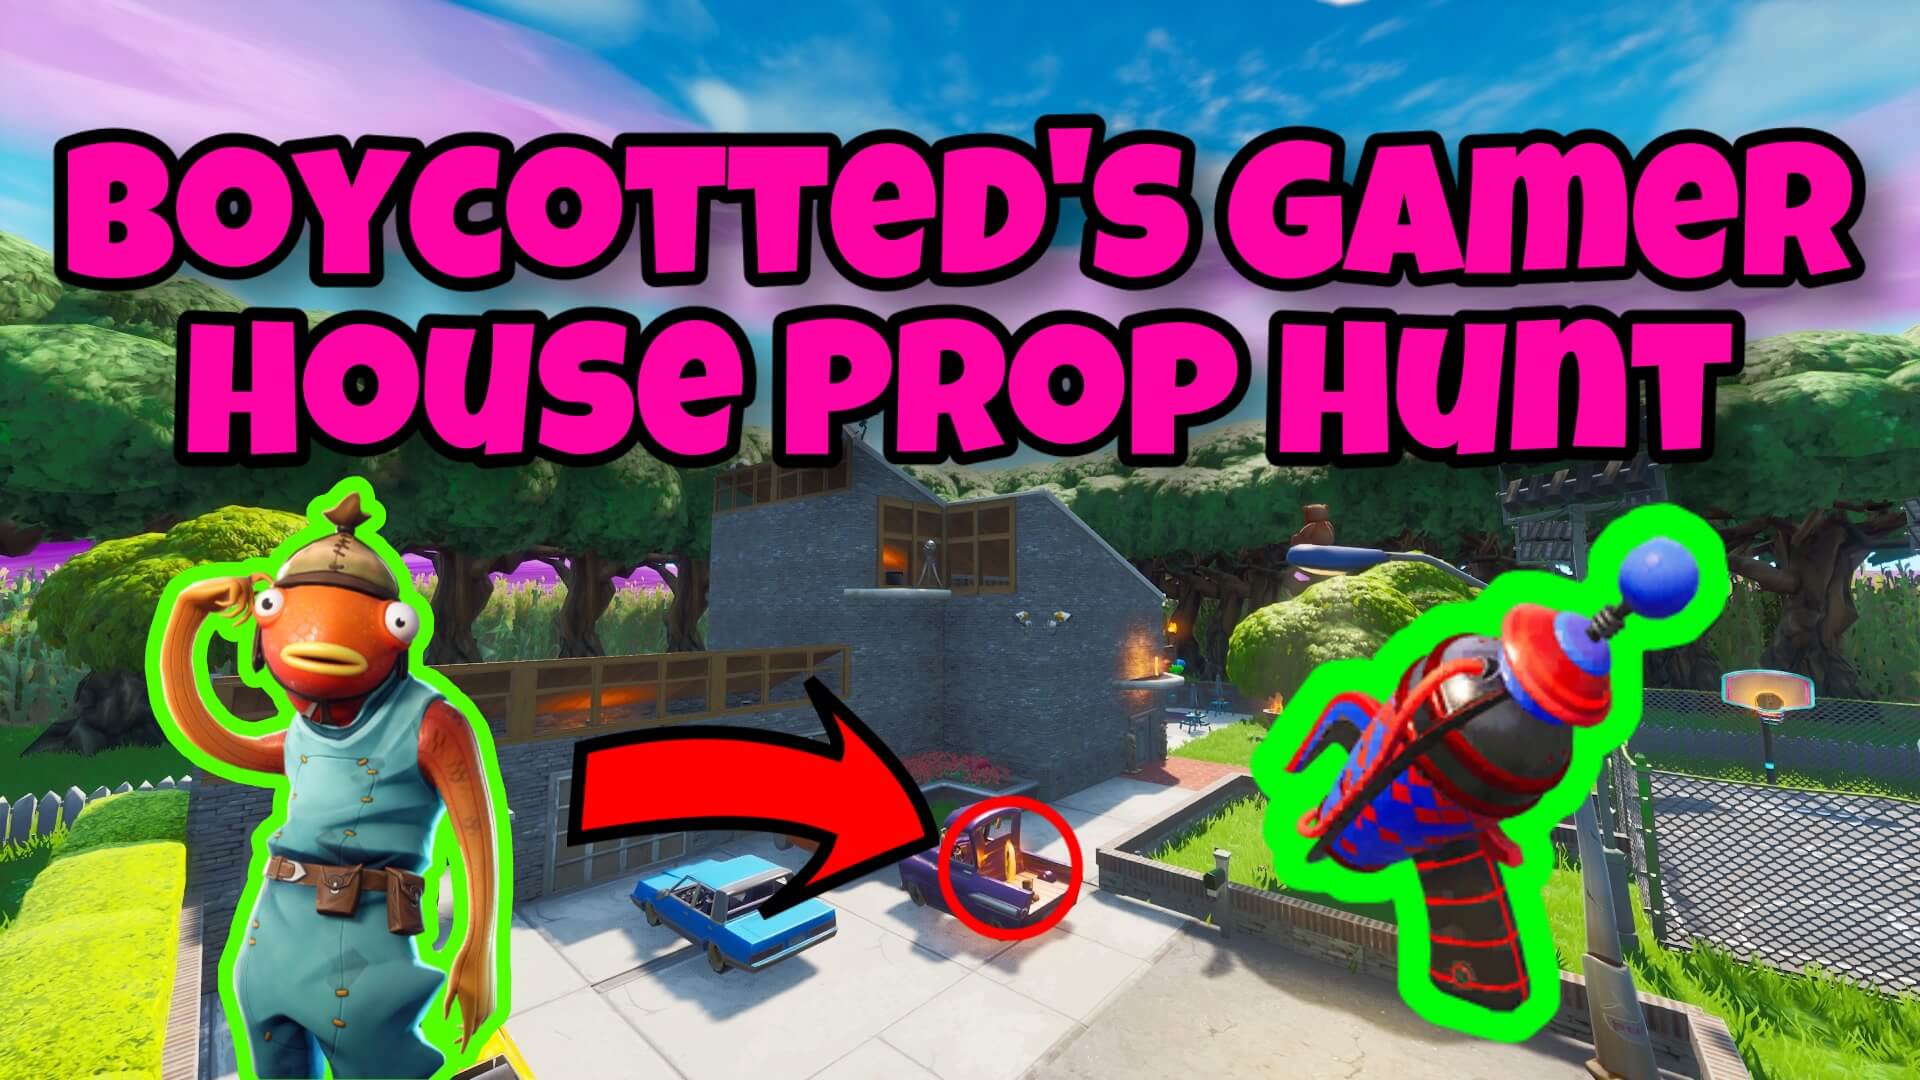 BOYCOTTED'S GAMER HOUSE PROP HUNT!